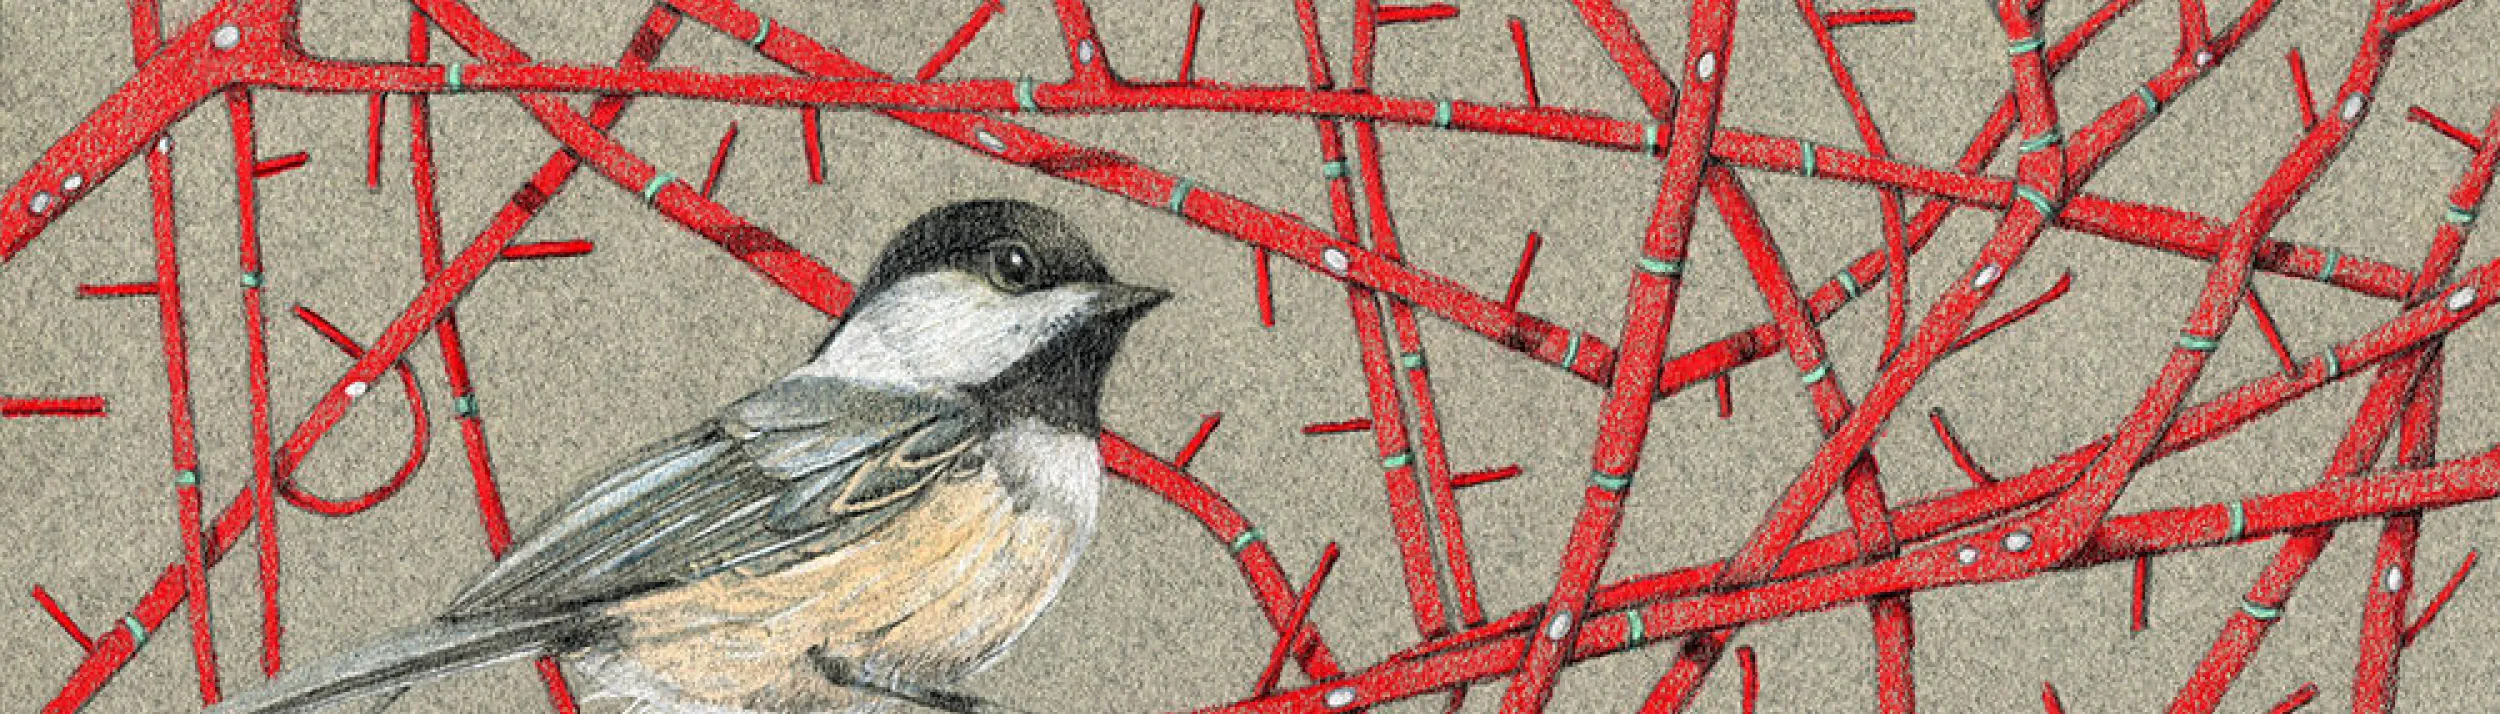 Kristin Maija Peterson, "Brave Chickadee Red Forest". A chickadee on a red leafless branch, surrounded by many other red leafless branches.